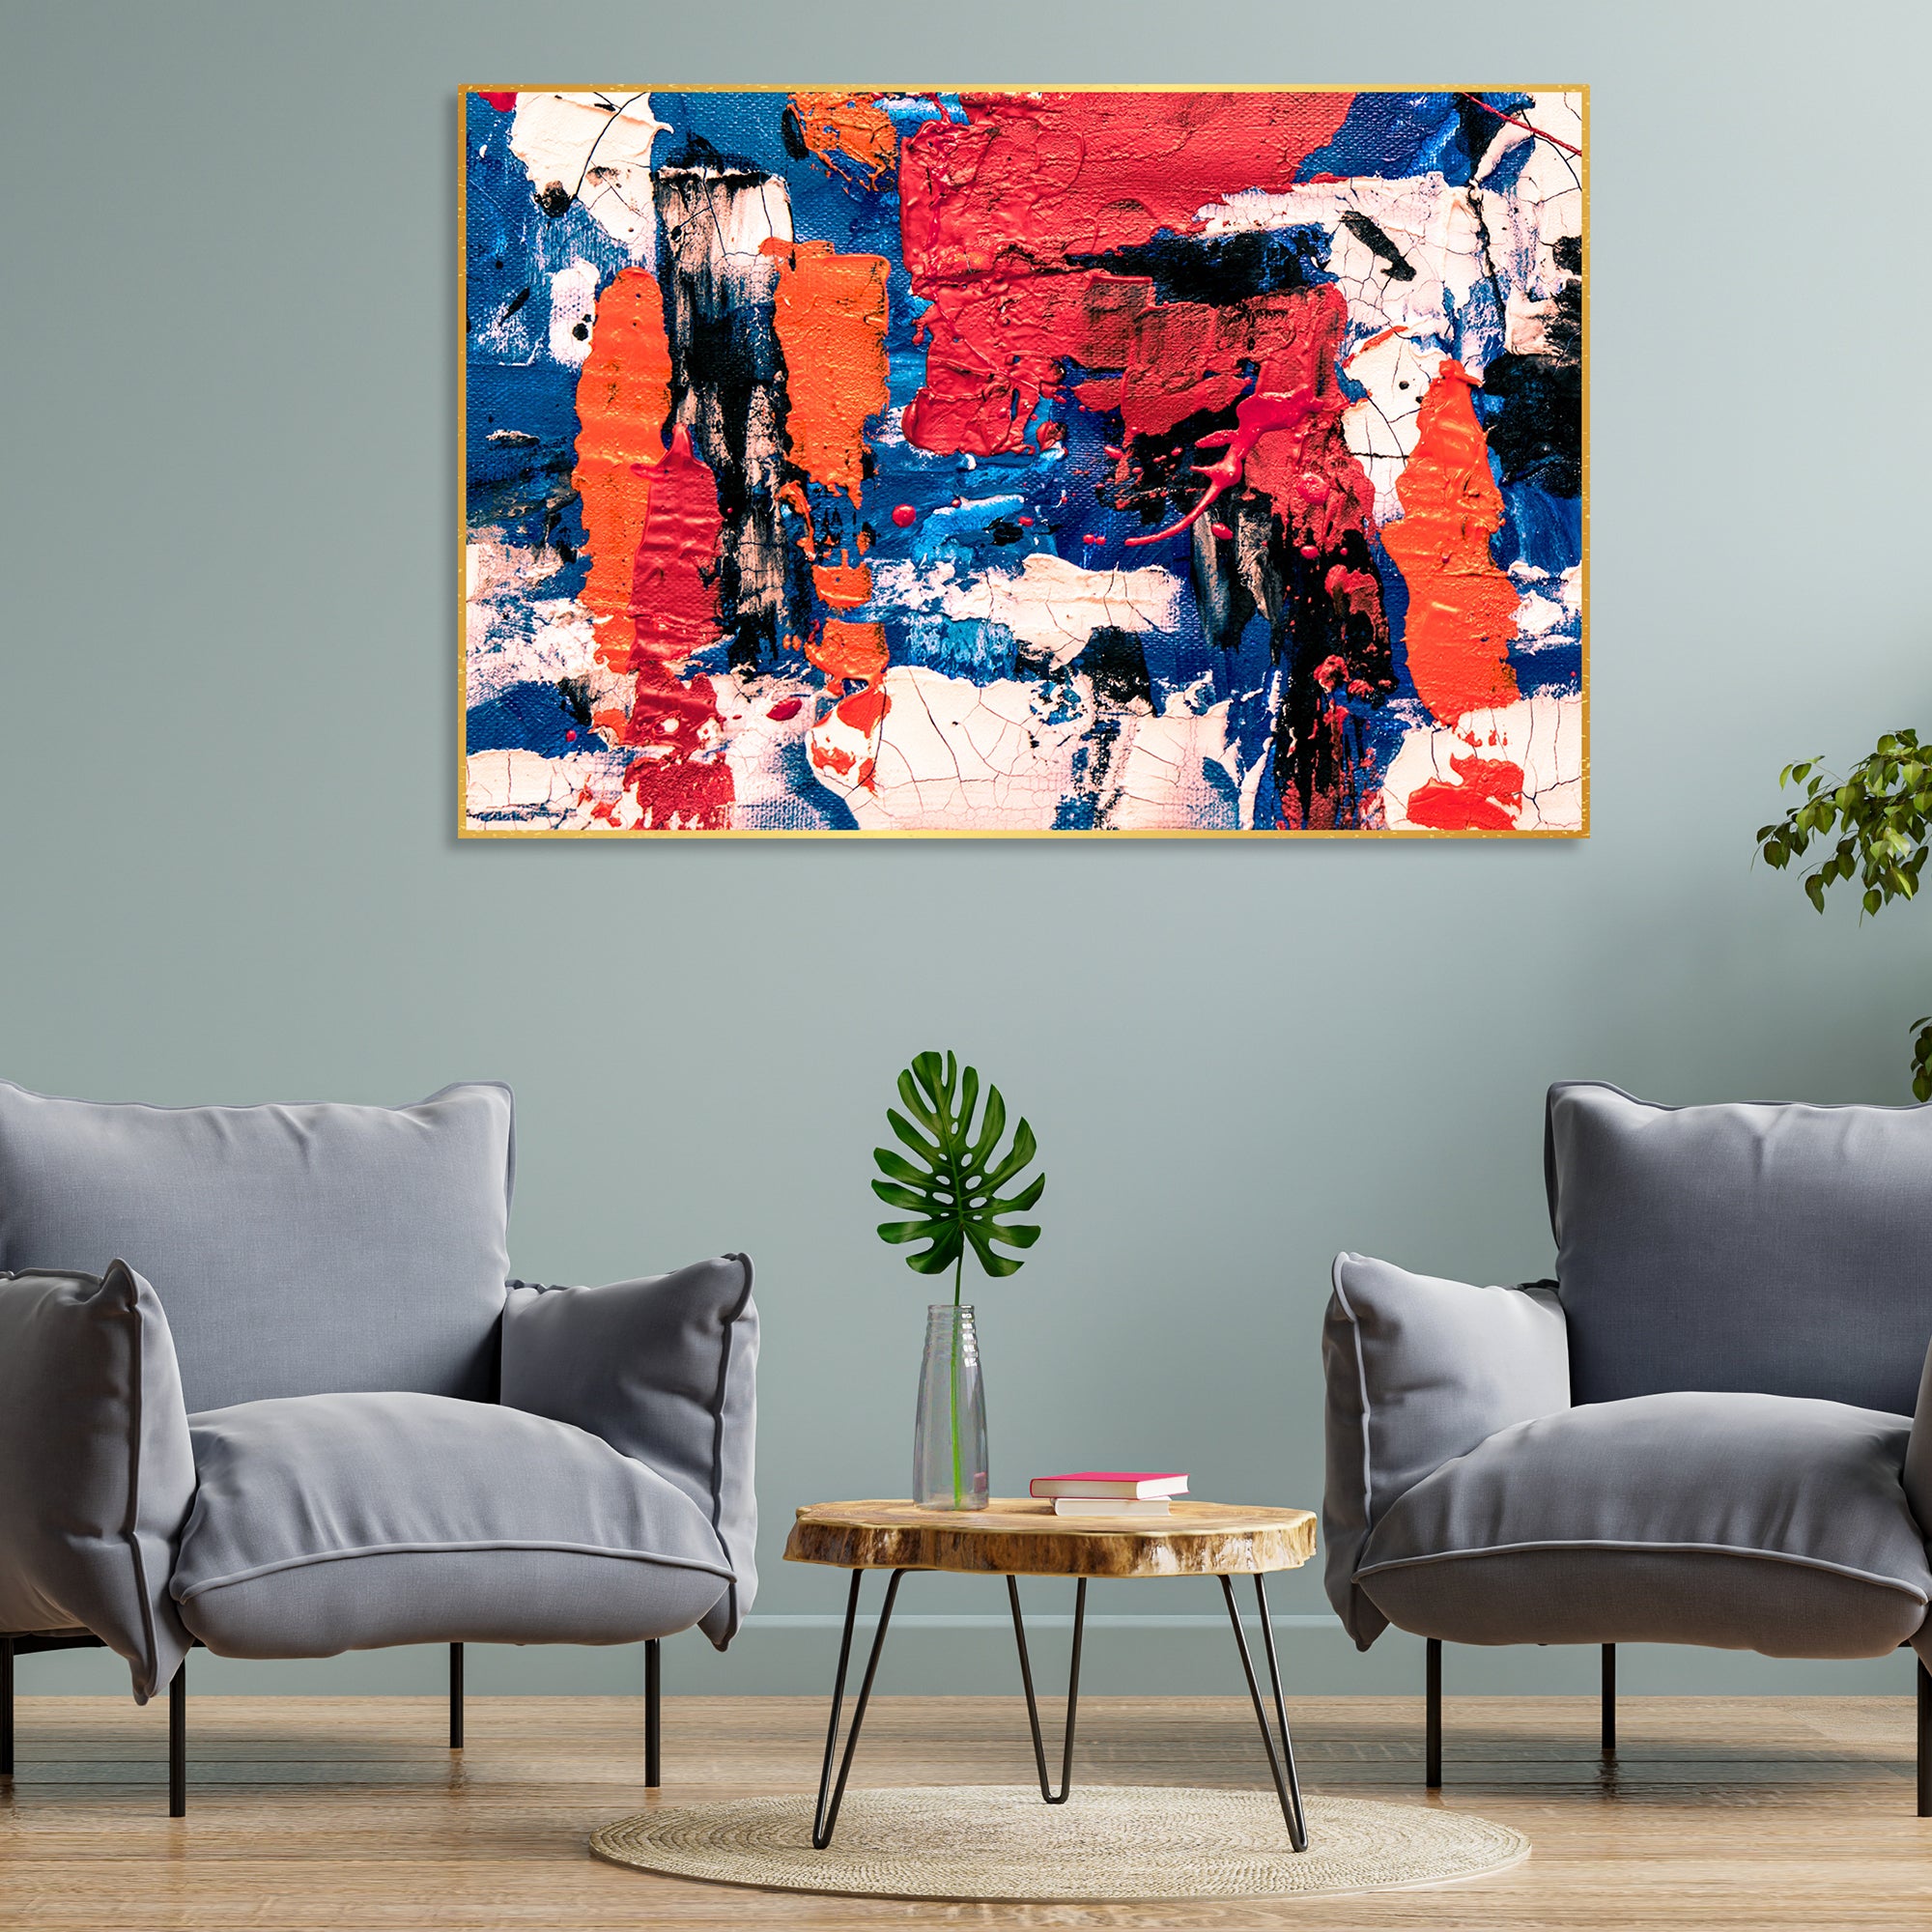 Colorful Abstract Art Wall Painting Floating Canvas